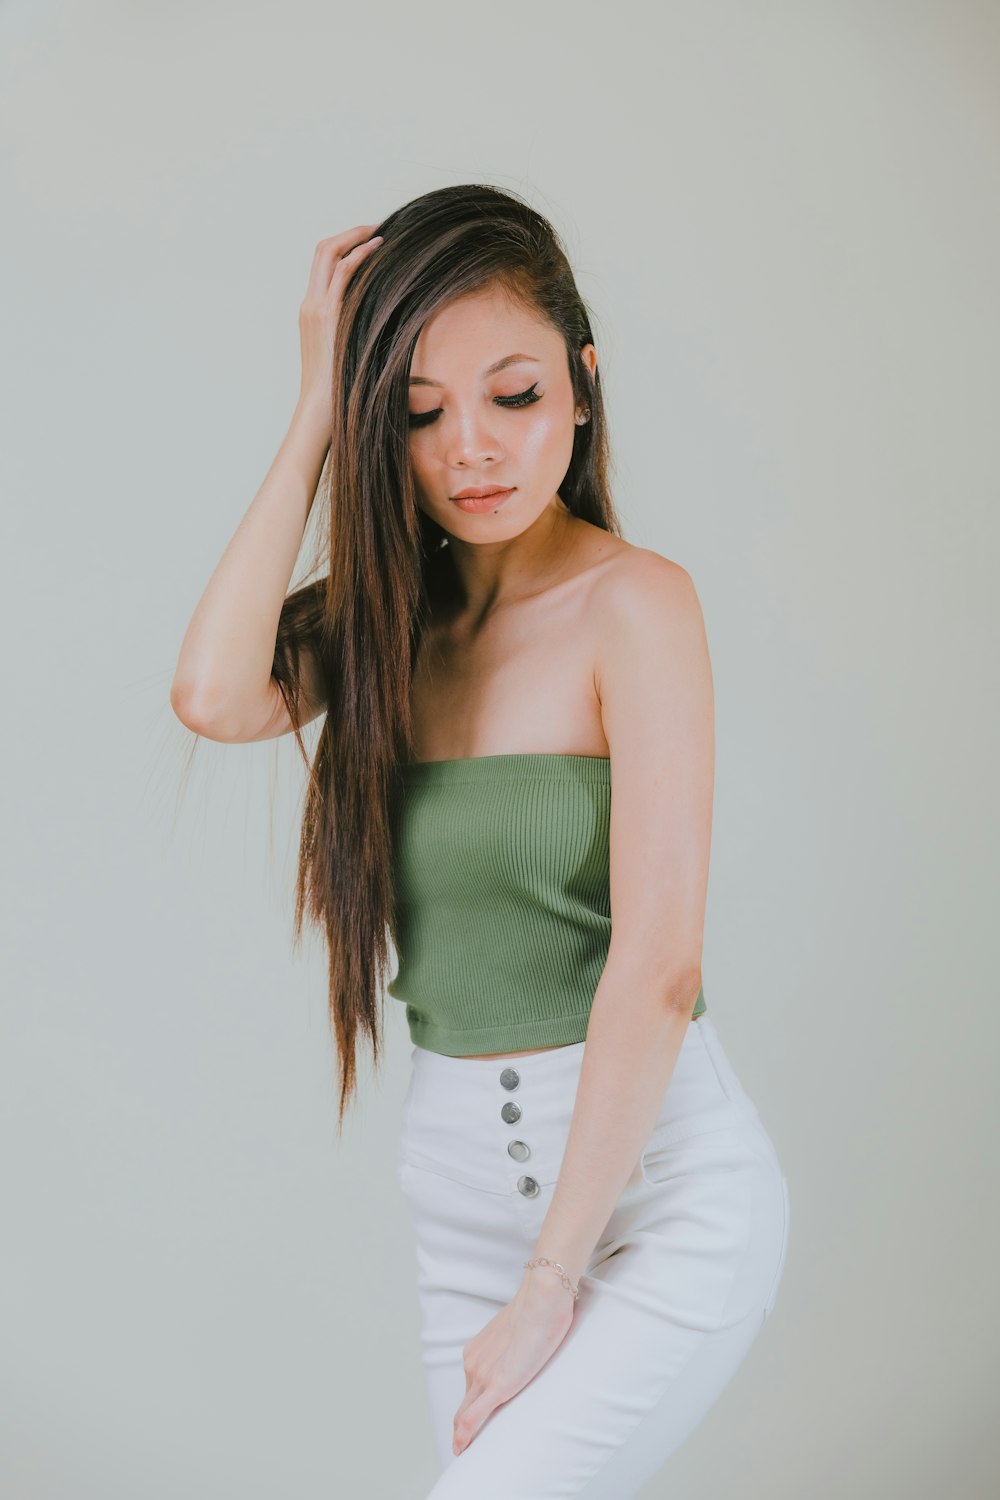 a woman in white pants and a green top